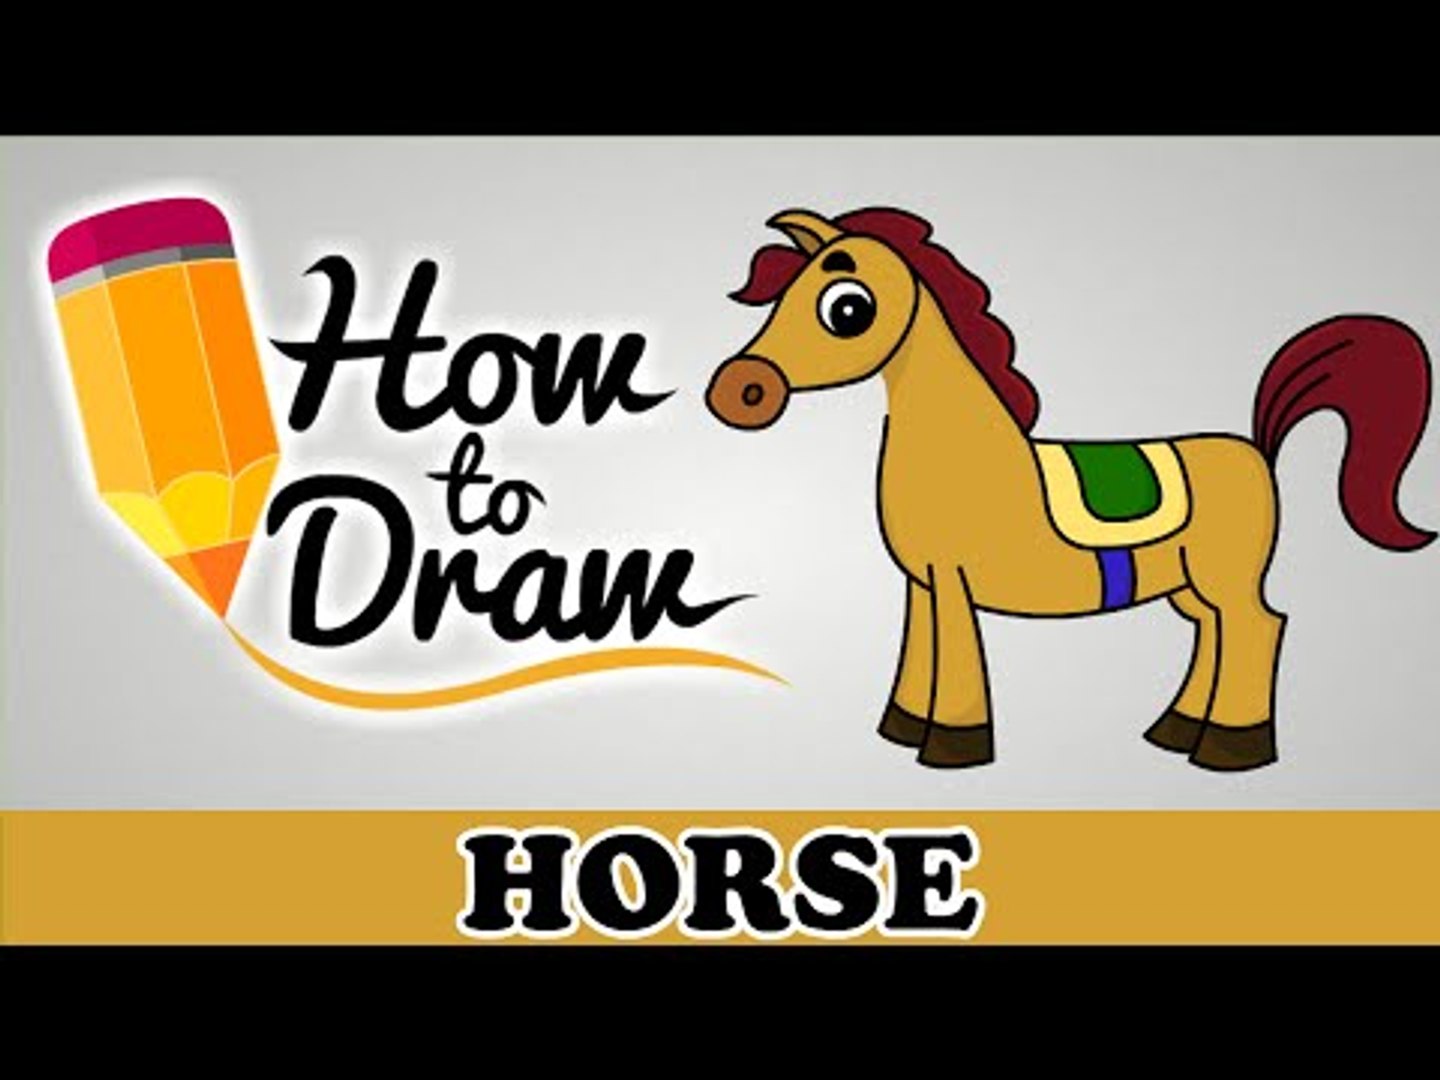 How To Draw A Horse - Easy Step By Step Cartoon Art Drawing Lesson Tutorial  For Kids & Beginners - video Dailymotion